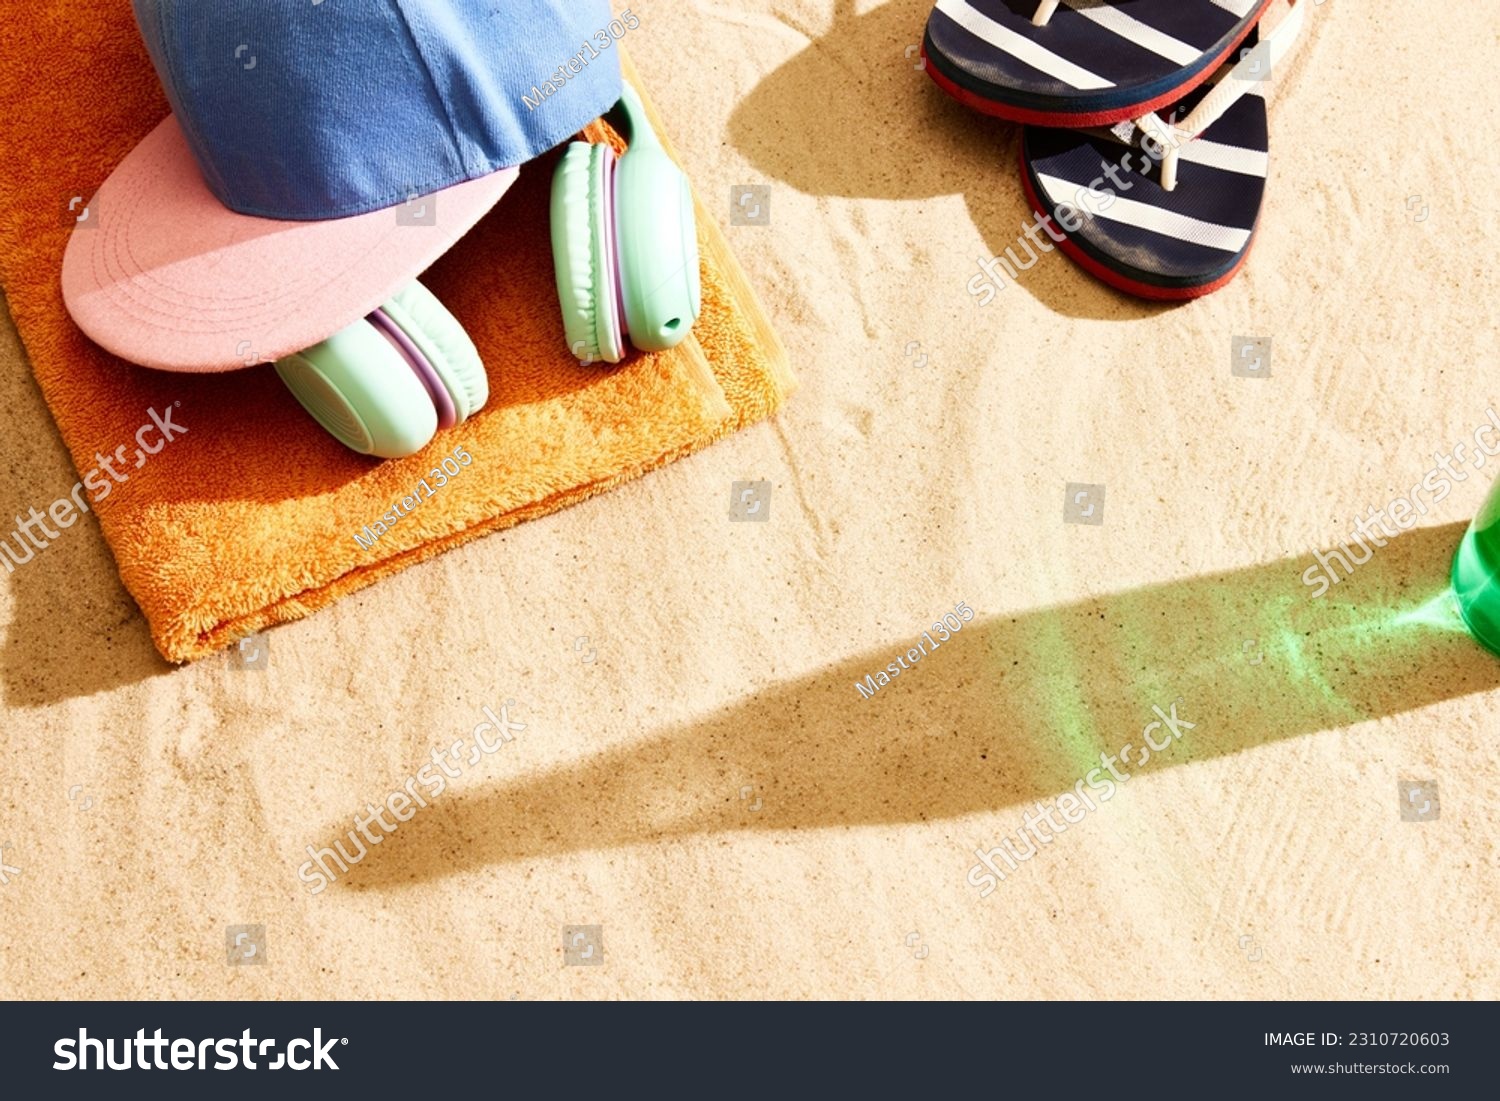 Shadow of beer bottle on warm sand with slippers, headphones, towel and cap. Summertime relaxation. Concept of alcohol drink, taste, summer vacation, holiday, brewery. Advertisement #2310720603